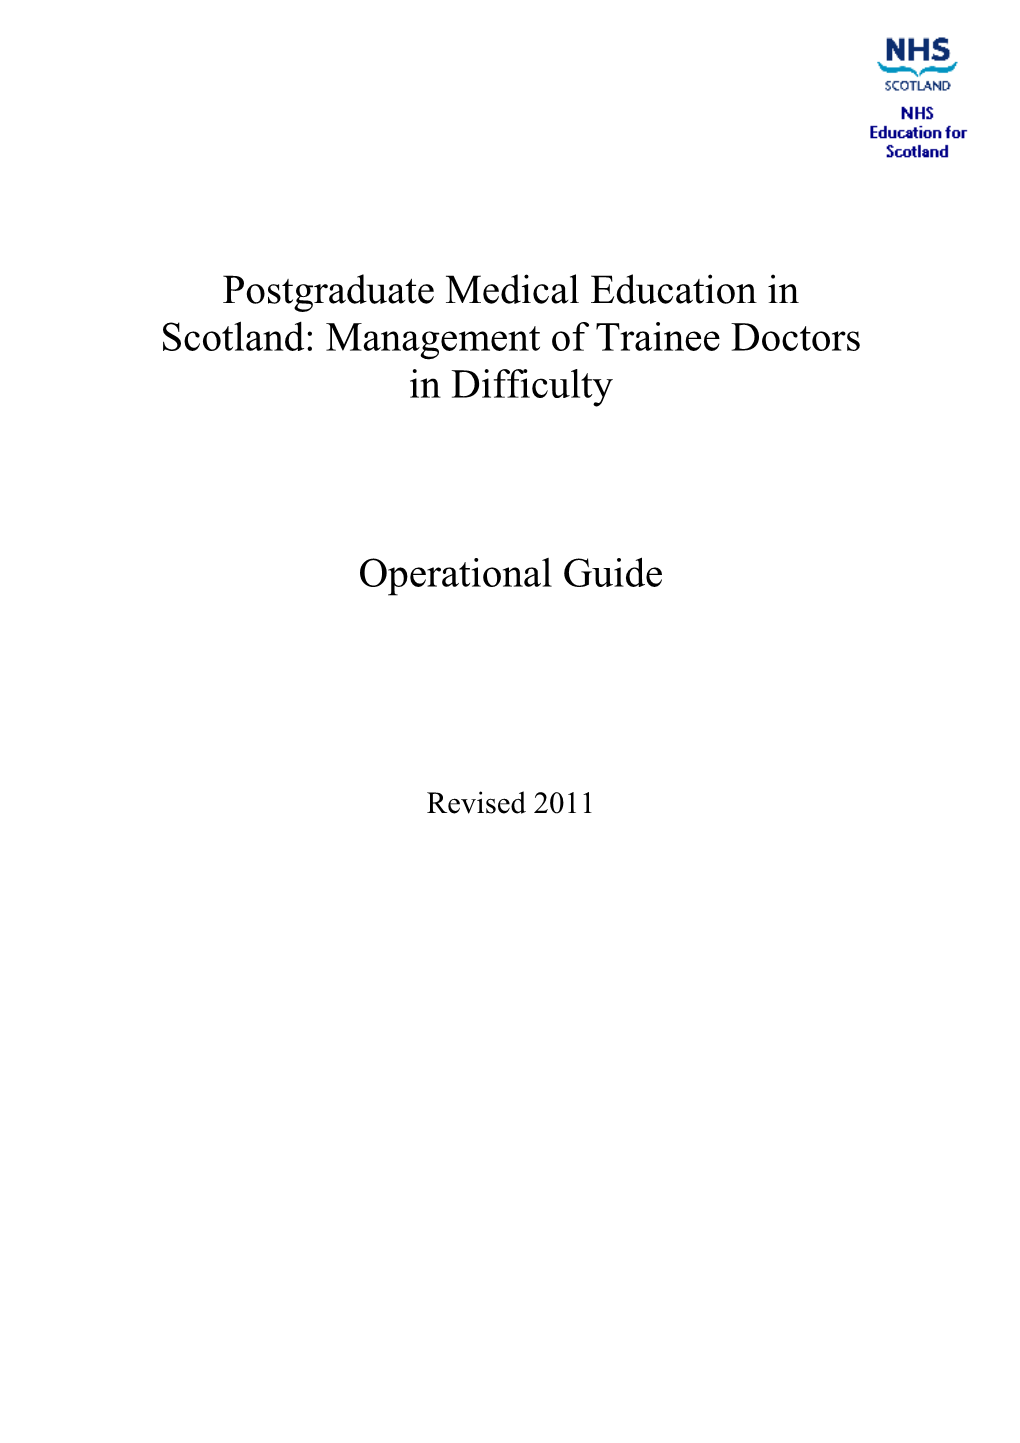 Postgraduate Medical Education in Scotland: Management of Trainee Doctors in Difficulty